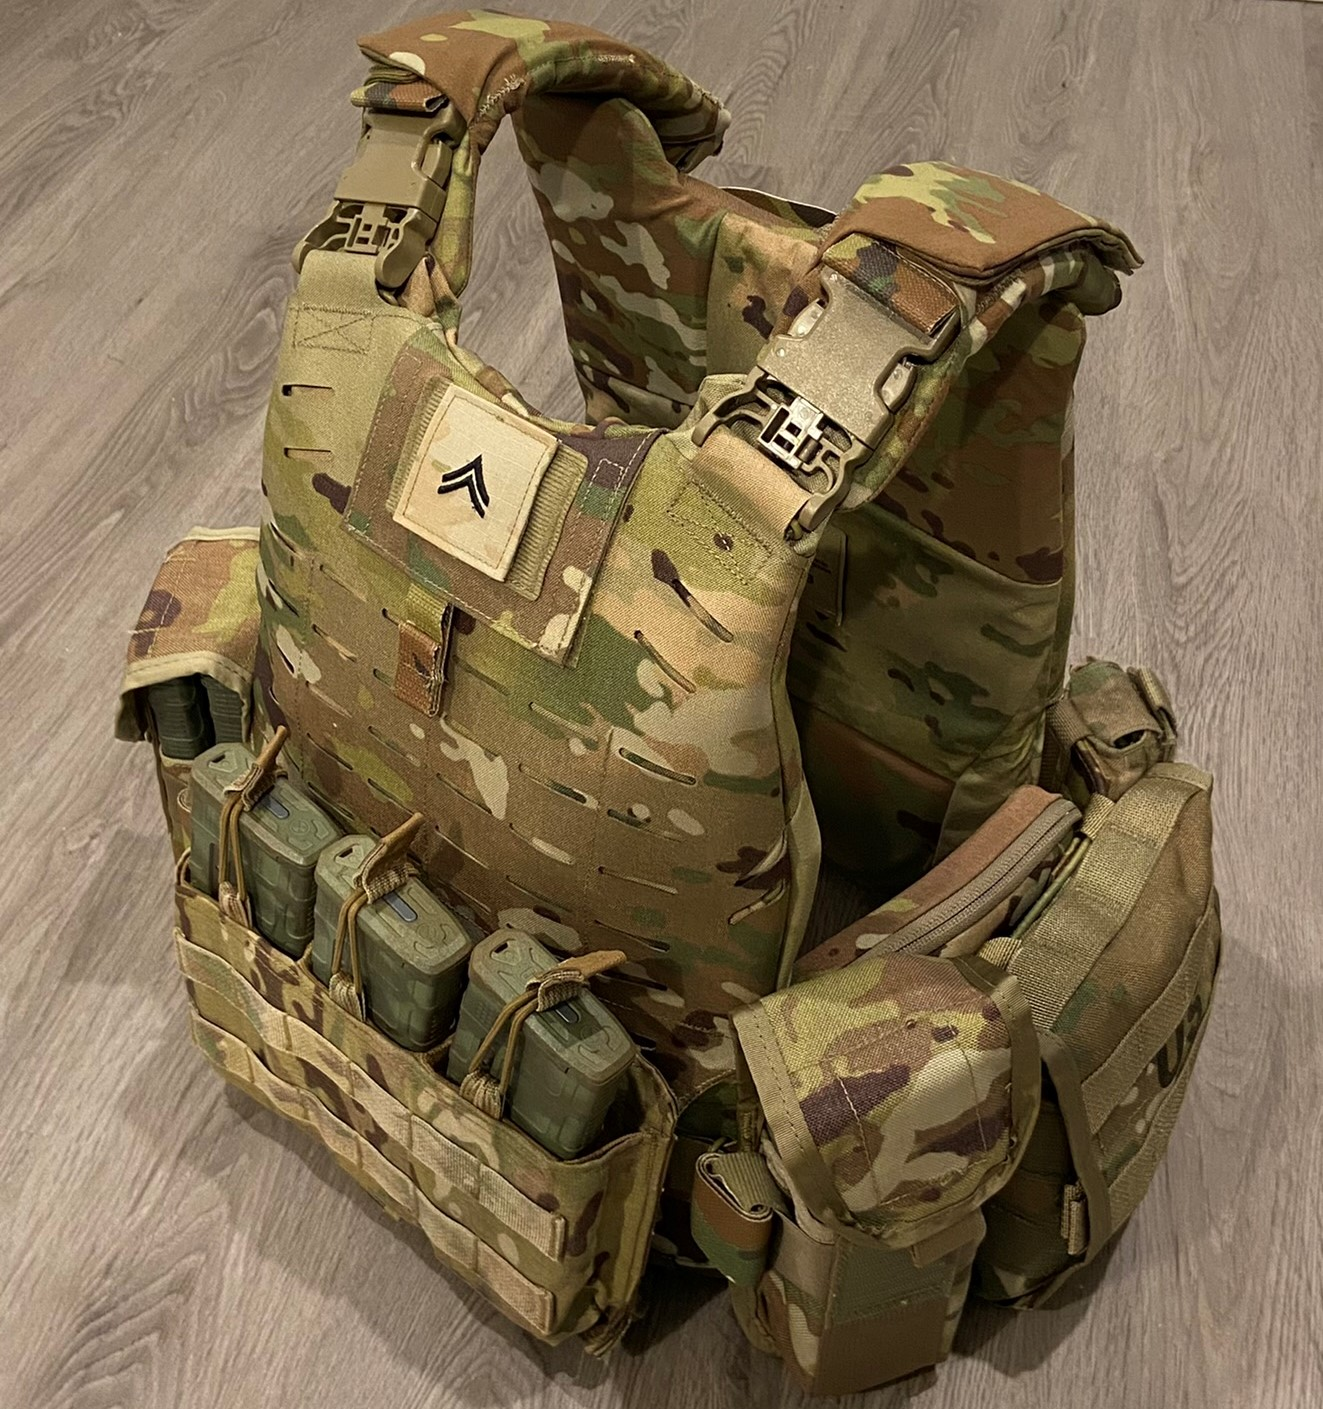 The plate carrier style Modular Scalable Vest Gen II